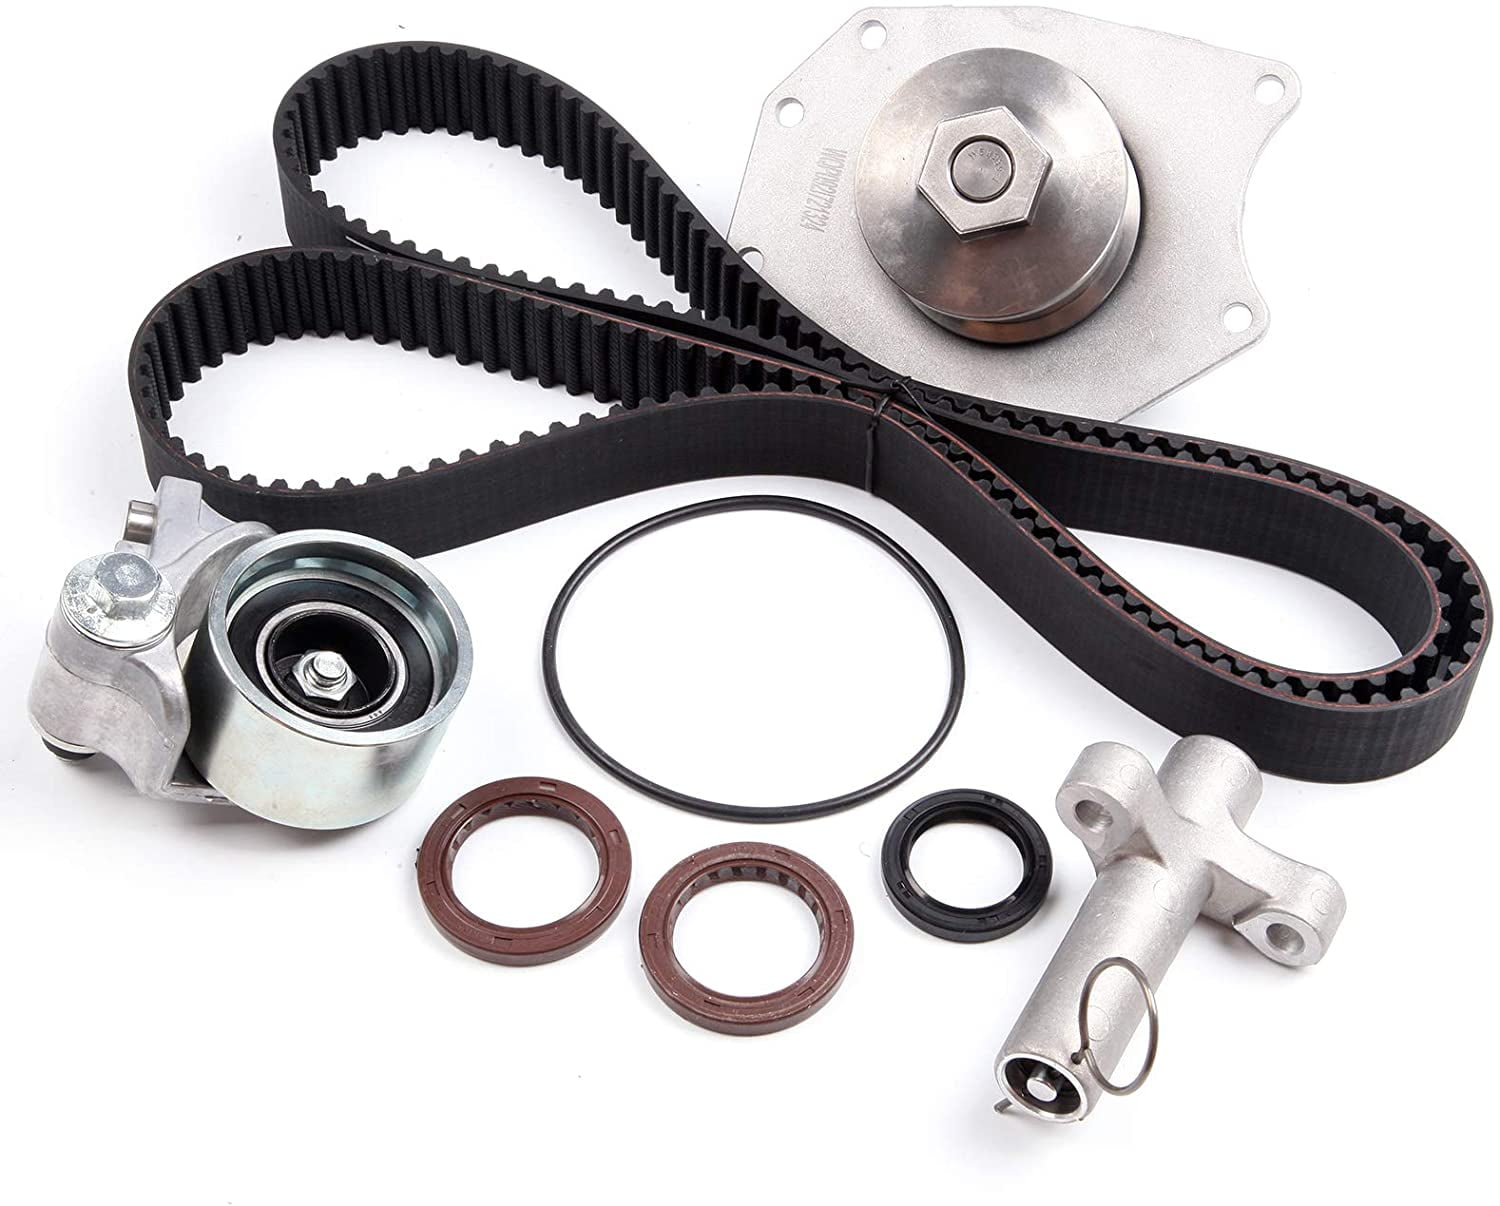 CCIYU Timing Belt Water Pump Kits Fits for 1999-2002 for Chrysler 300M  1998-2002 for Chrysler Concorde 1998-2002 for Chrysler Intrepid 1999-2001  for Chrysler LHS 2001-2002 for Chrysler Prowler